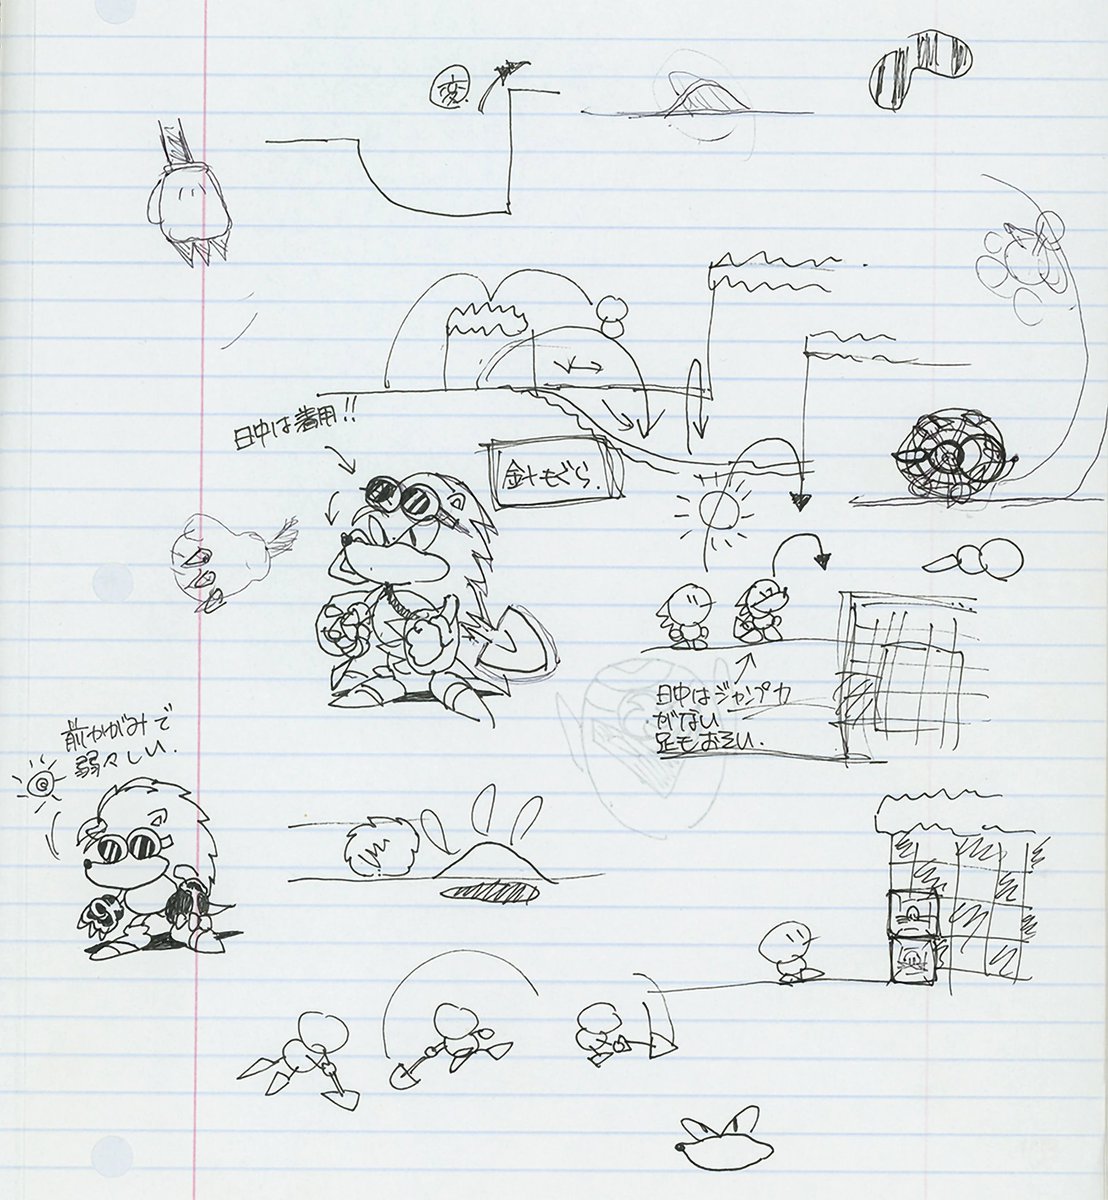 Concept art of what would eventually become Knuckles the Echidna depicts him potentially using a shovel for digging and fighting, as well as using goggles. 